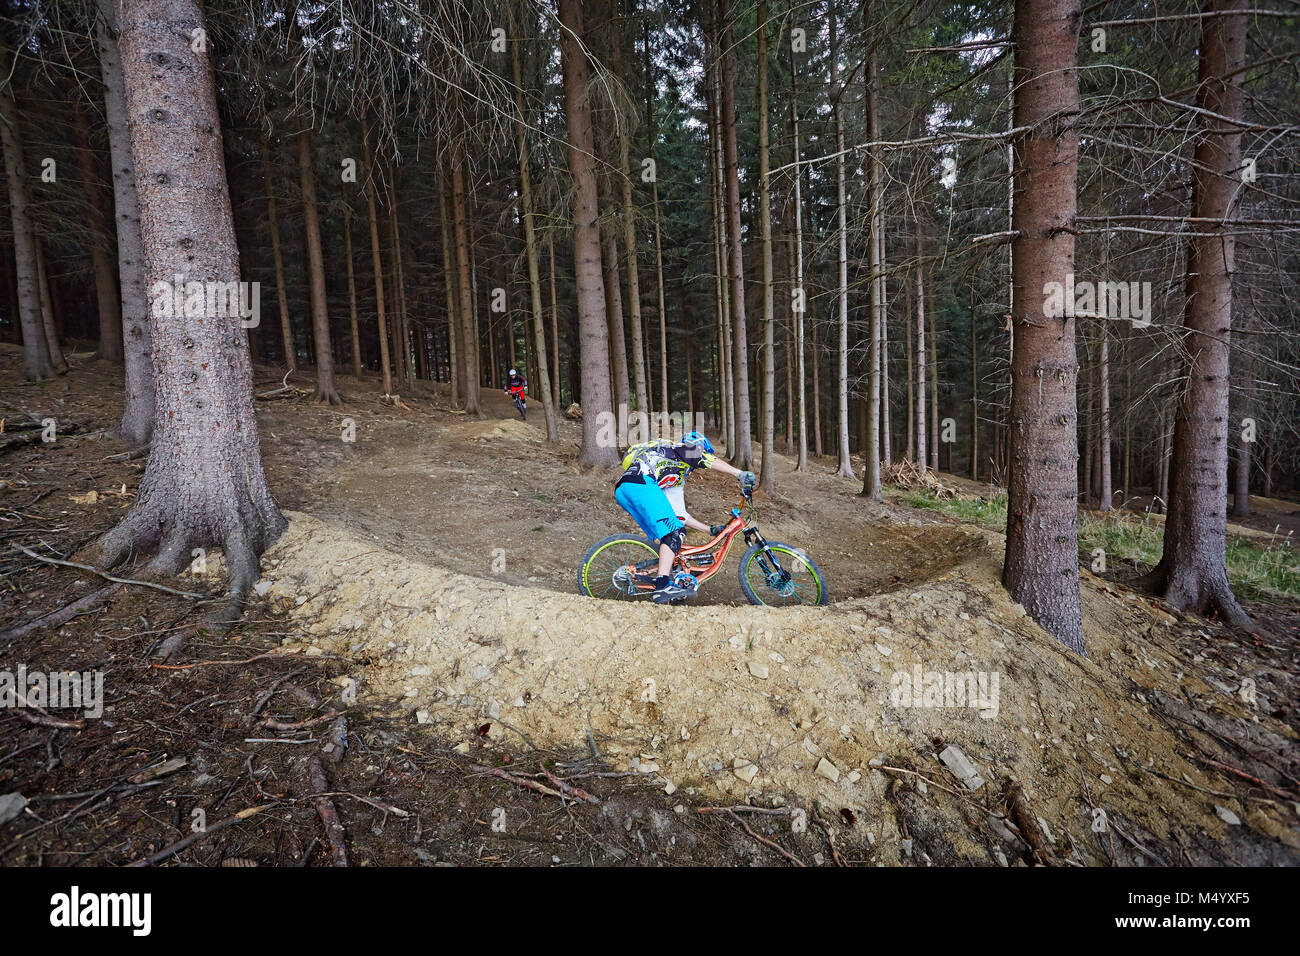 Mountain biker riding on trail in forest Stock Photo